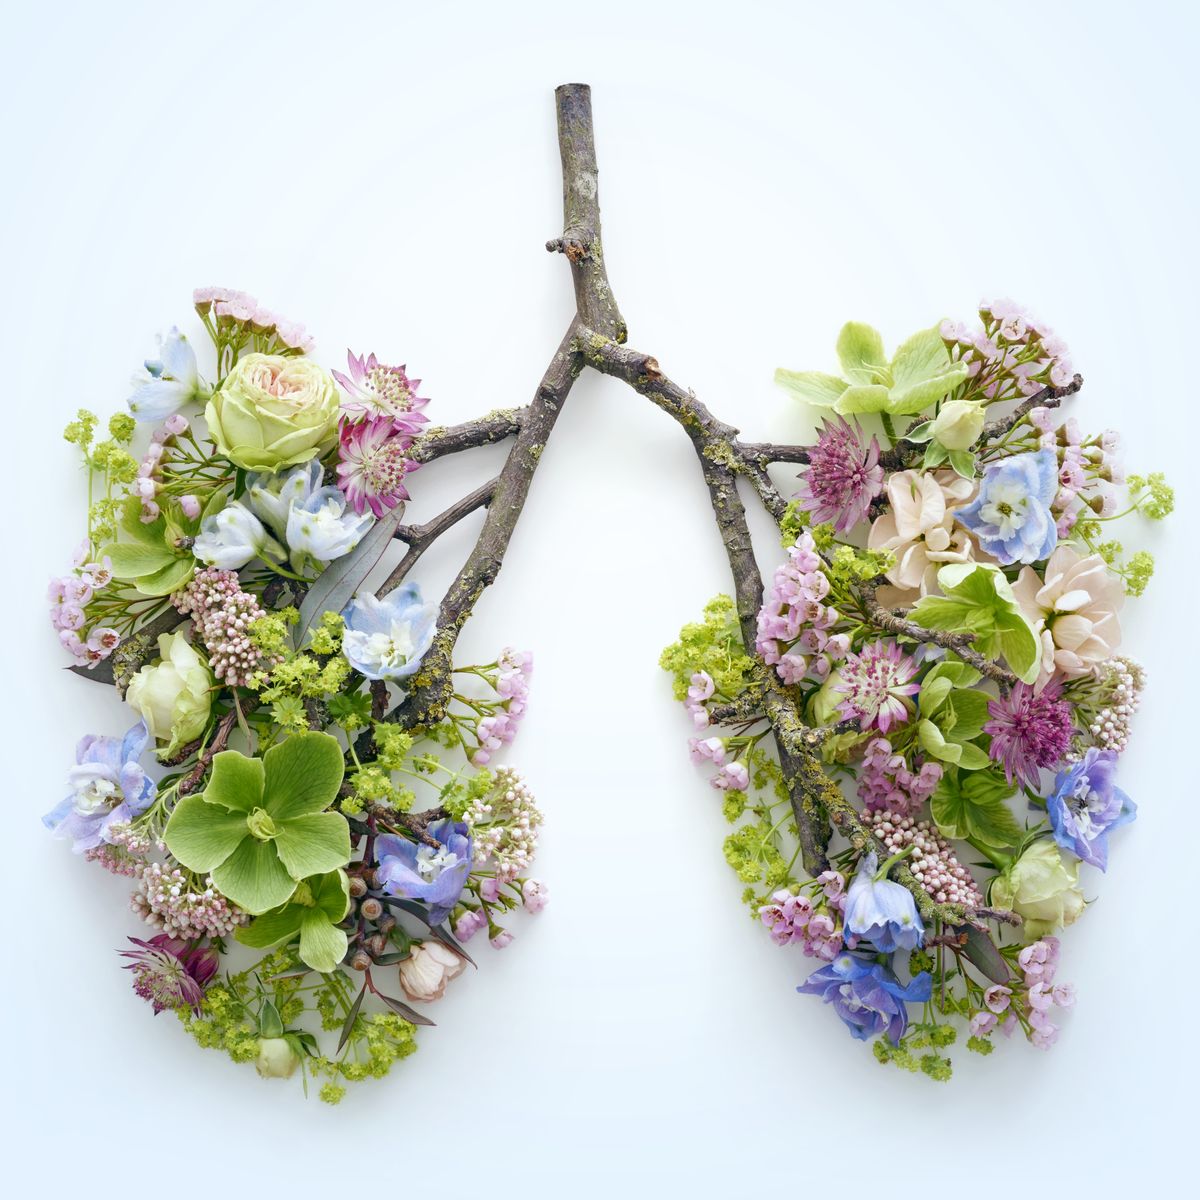 spring flowers representing human lungs